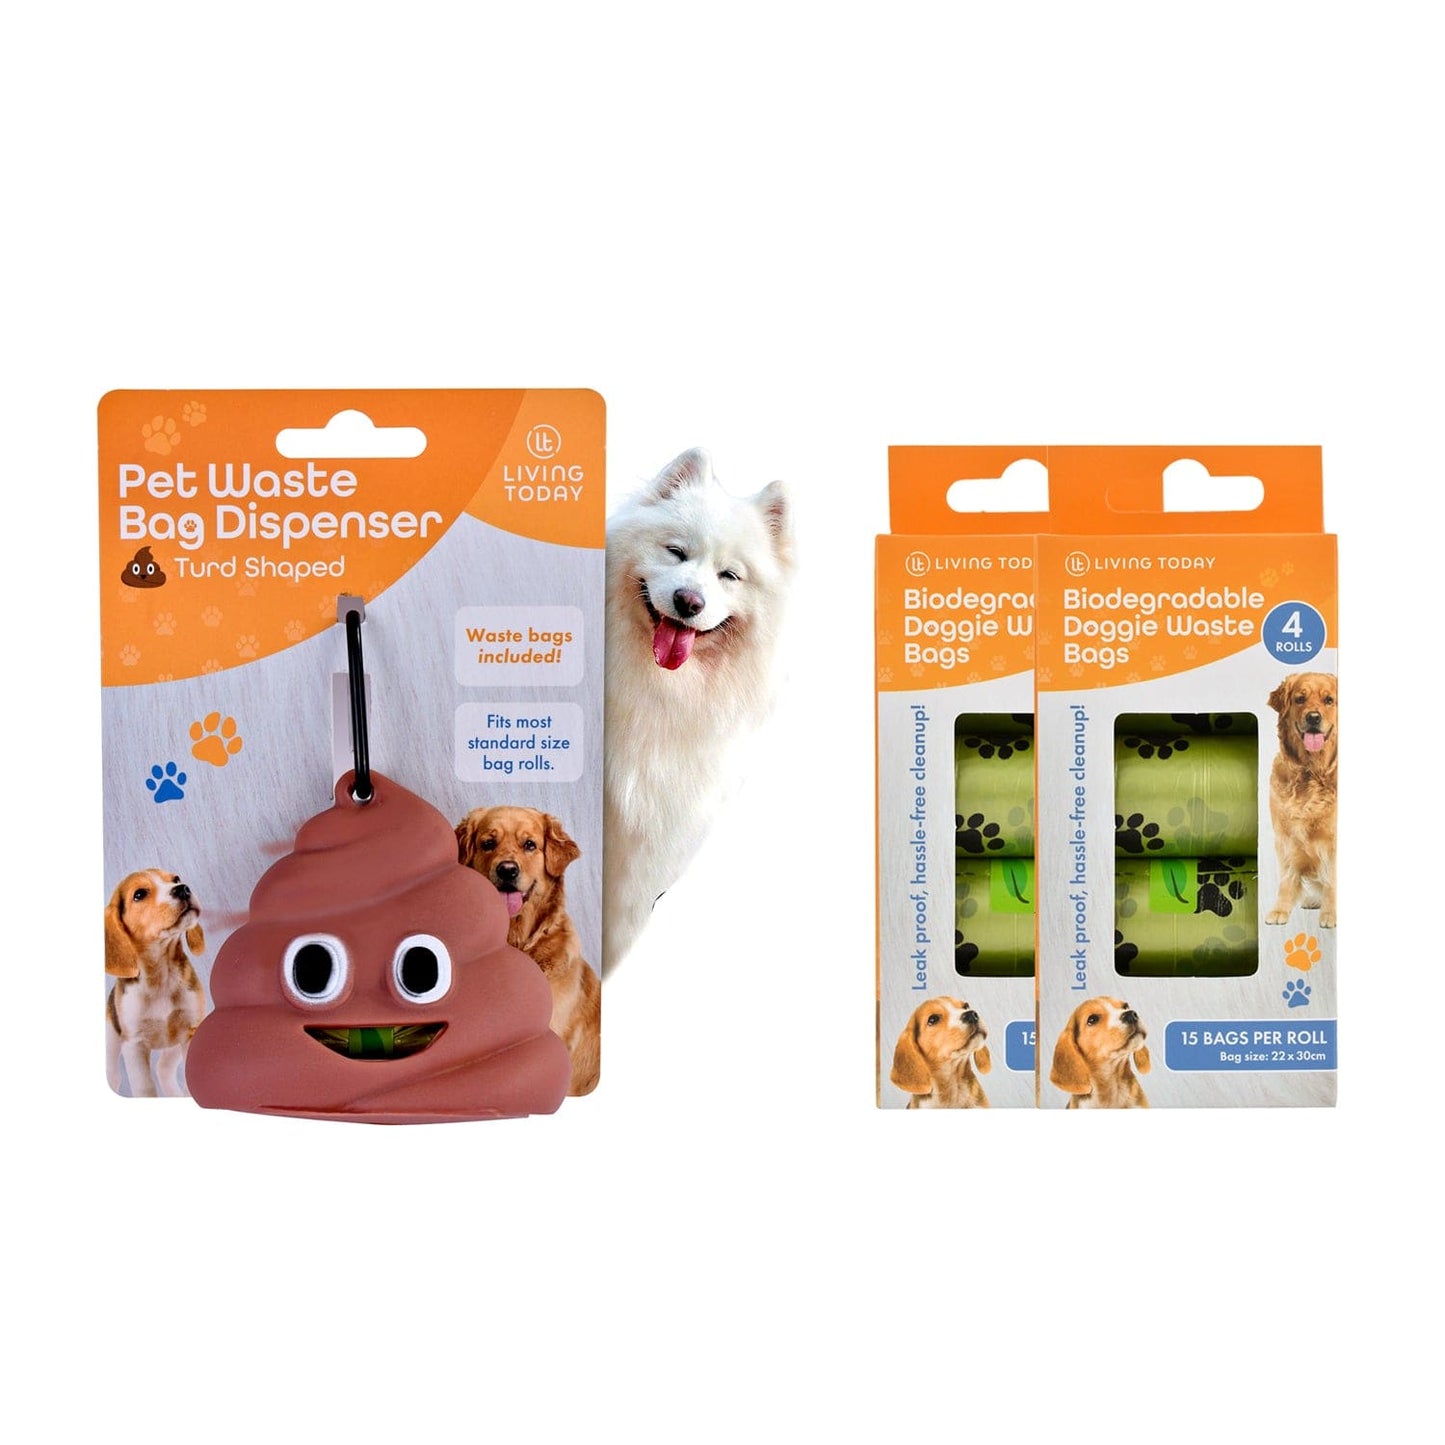 LIVINGTODAY dog poop dispenser and bags LIVINGTODAY Pet Dog Poop Dispenser and 135 Biodegradable Unscented Waste Bags